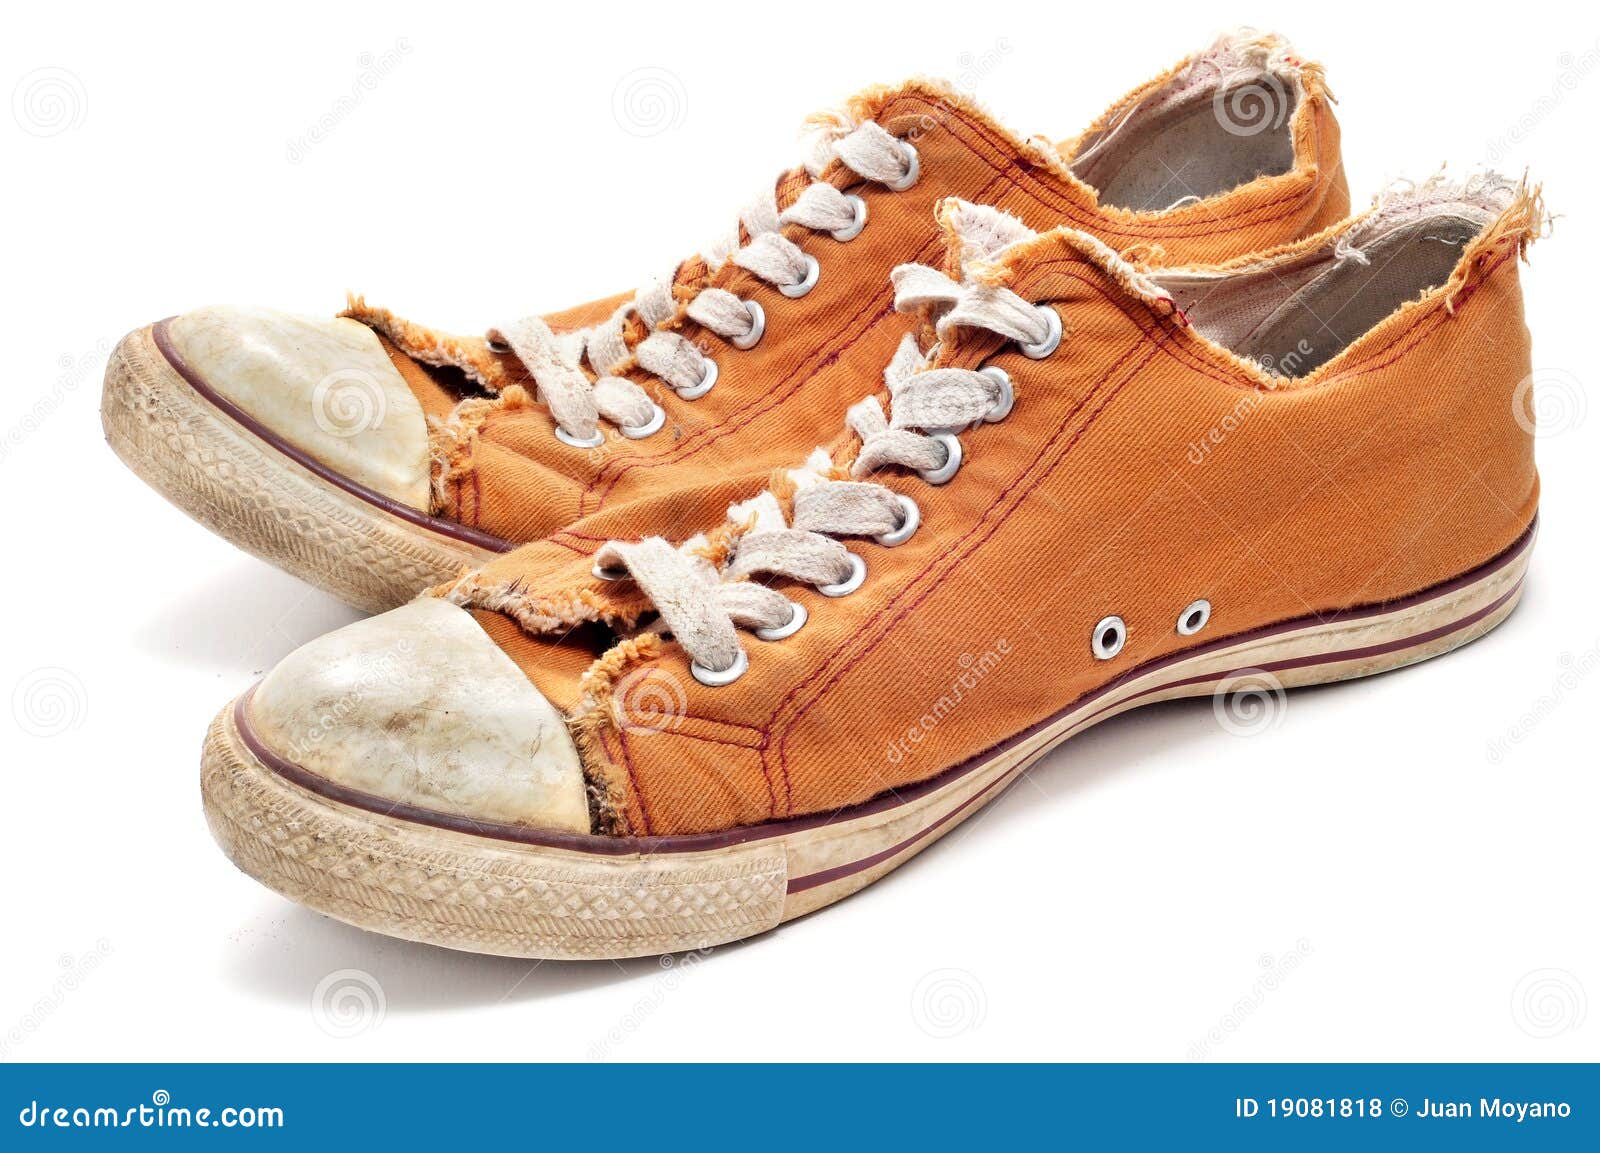 Worn sneakers stock photo. Image of sole, dressing, fashion - 19081818